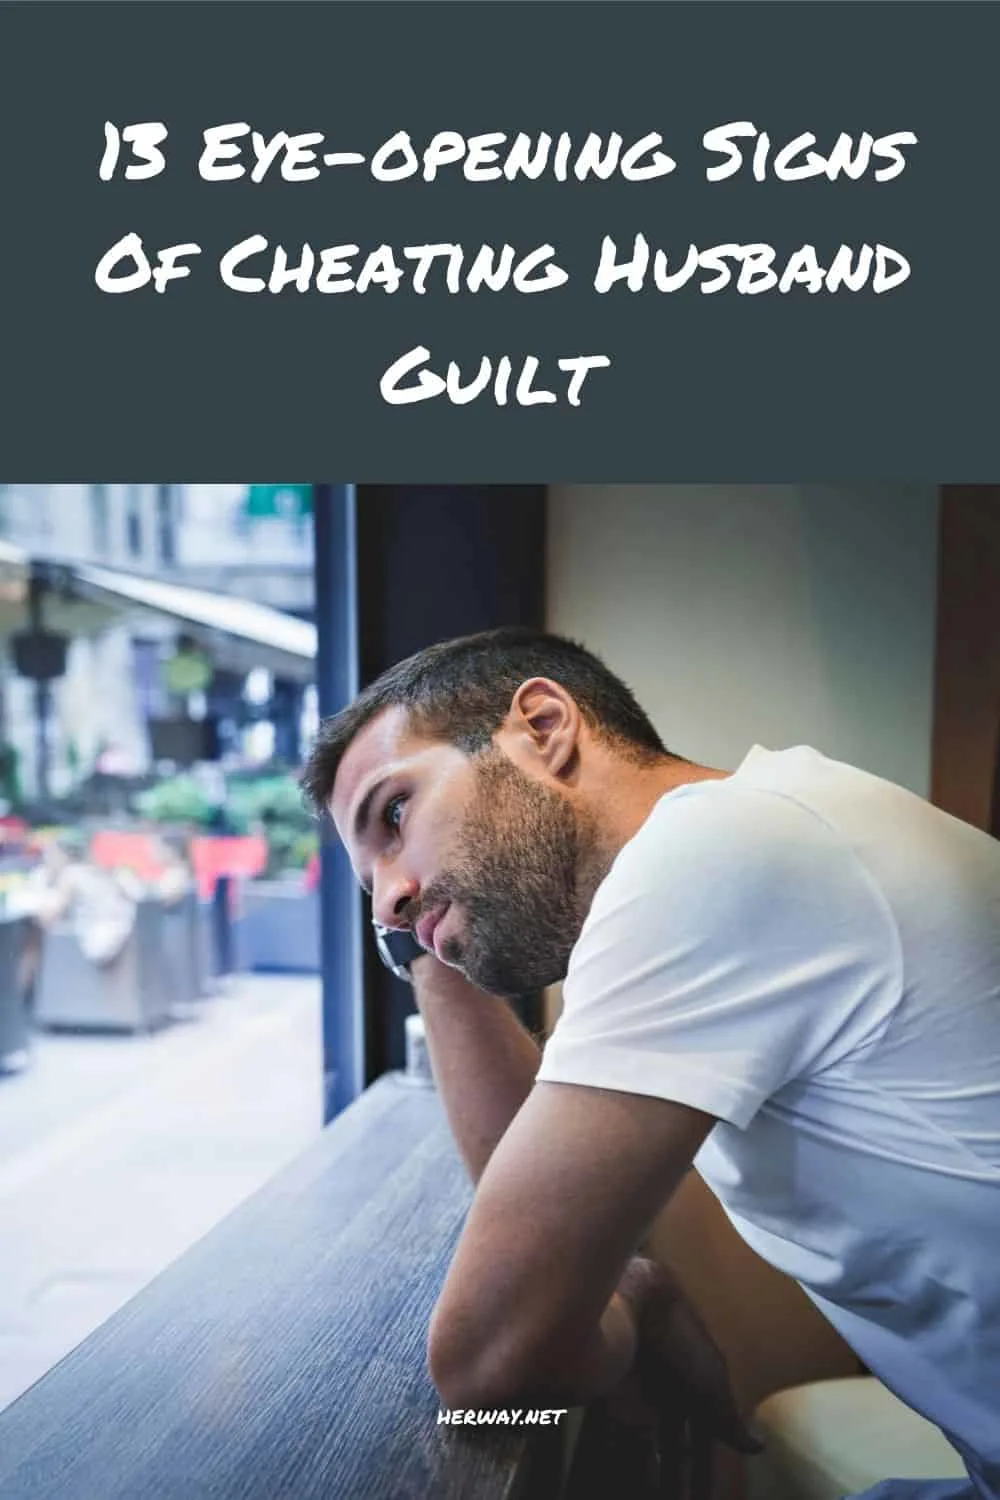 13 Eye-opening Signs Of Cheating Husband Guilt 